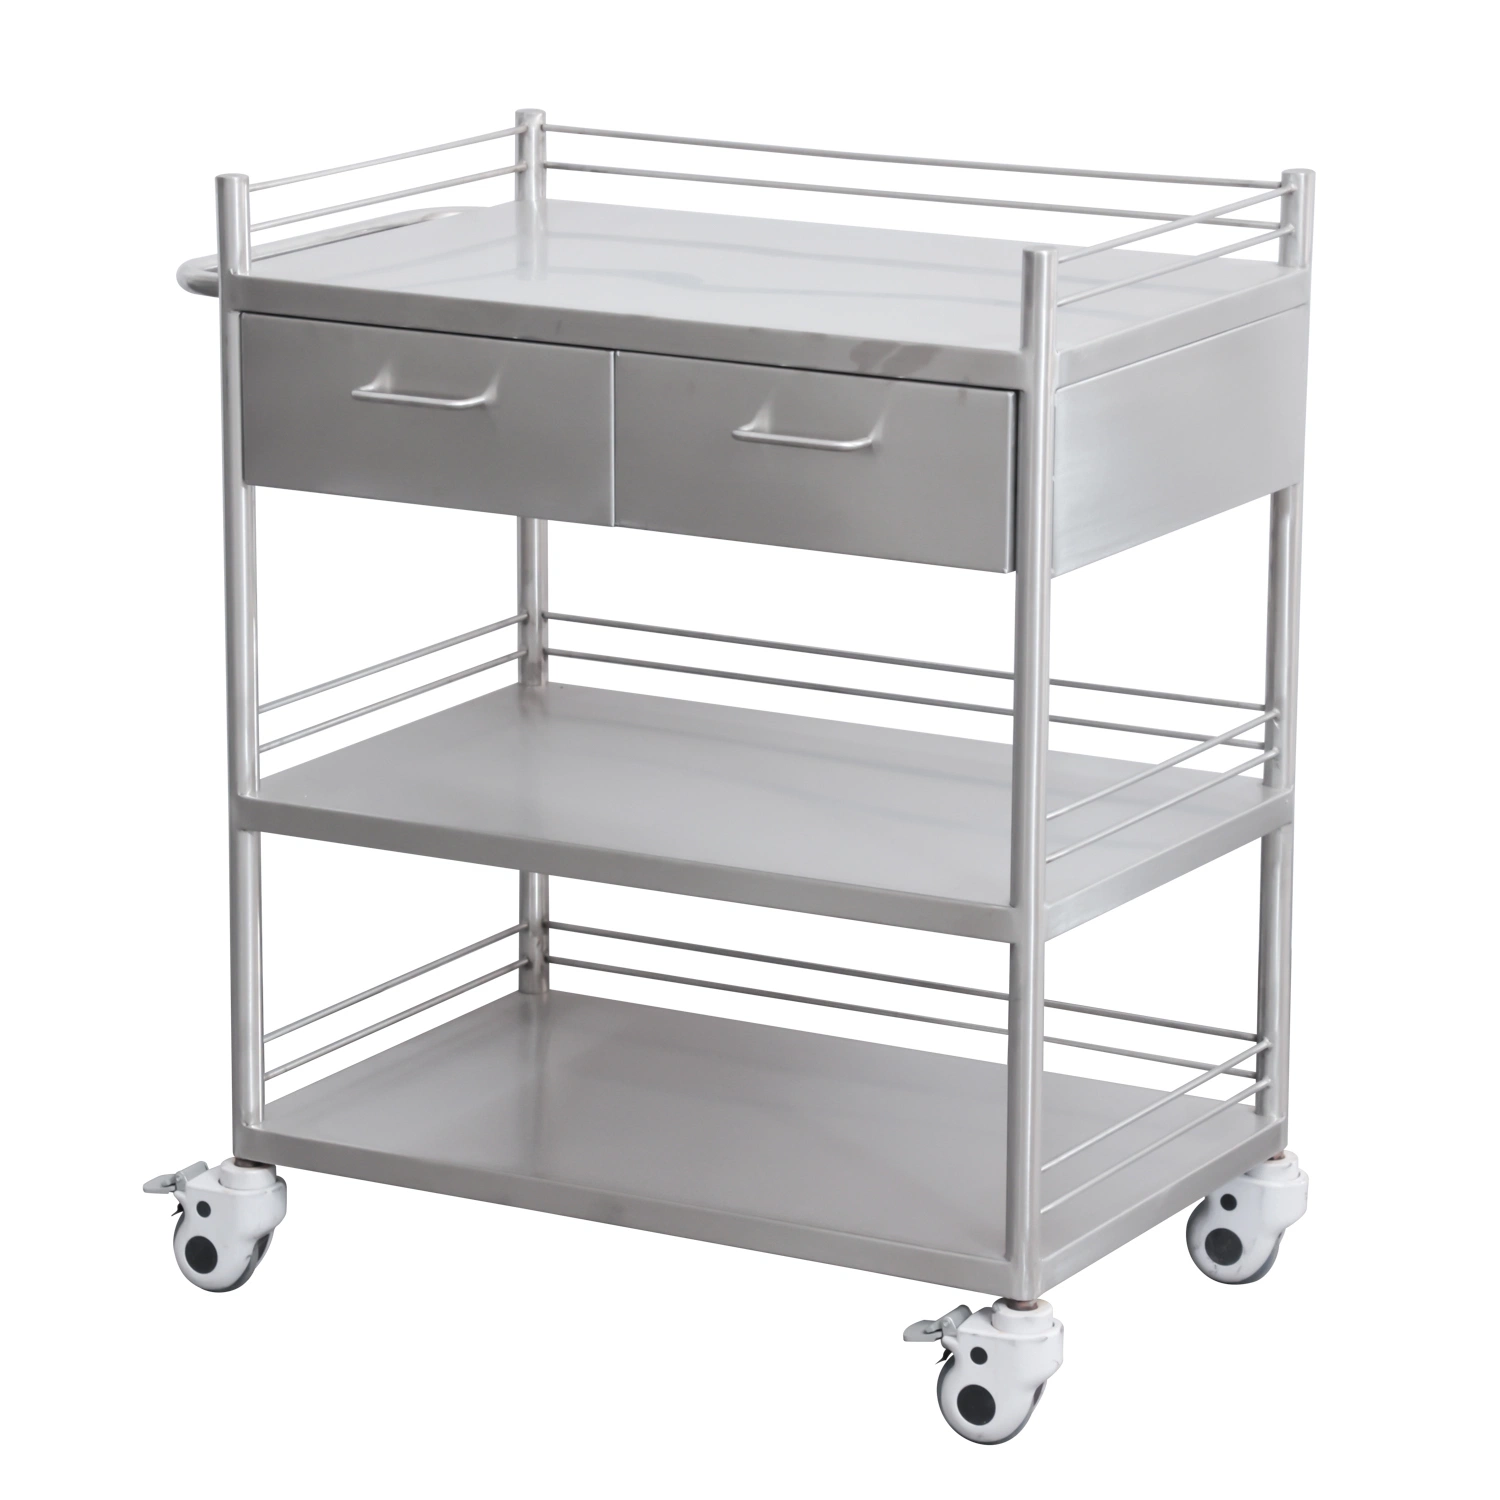 Medical One Drawer Stainless Steel Trolley Veterinary Surgical Instrument Trolley Cart